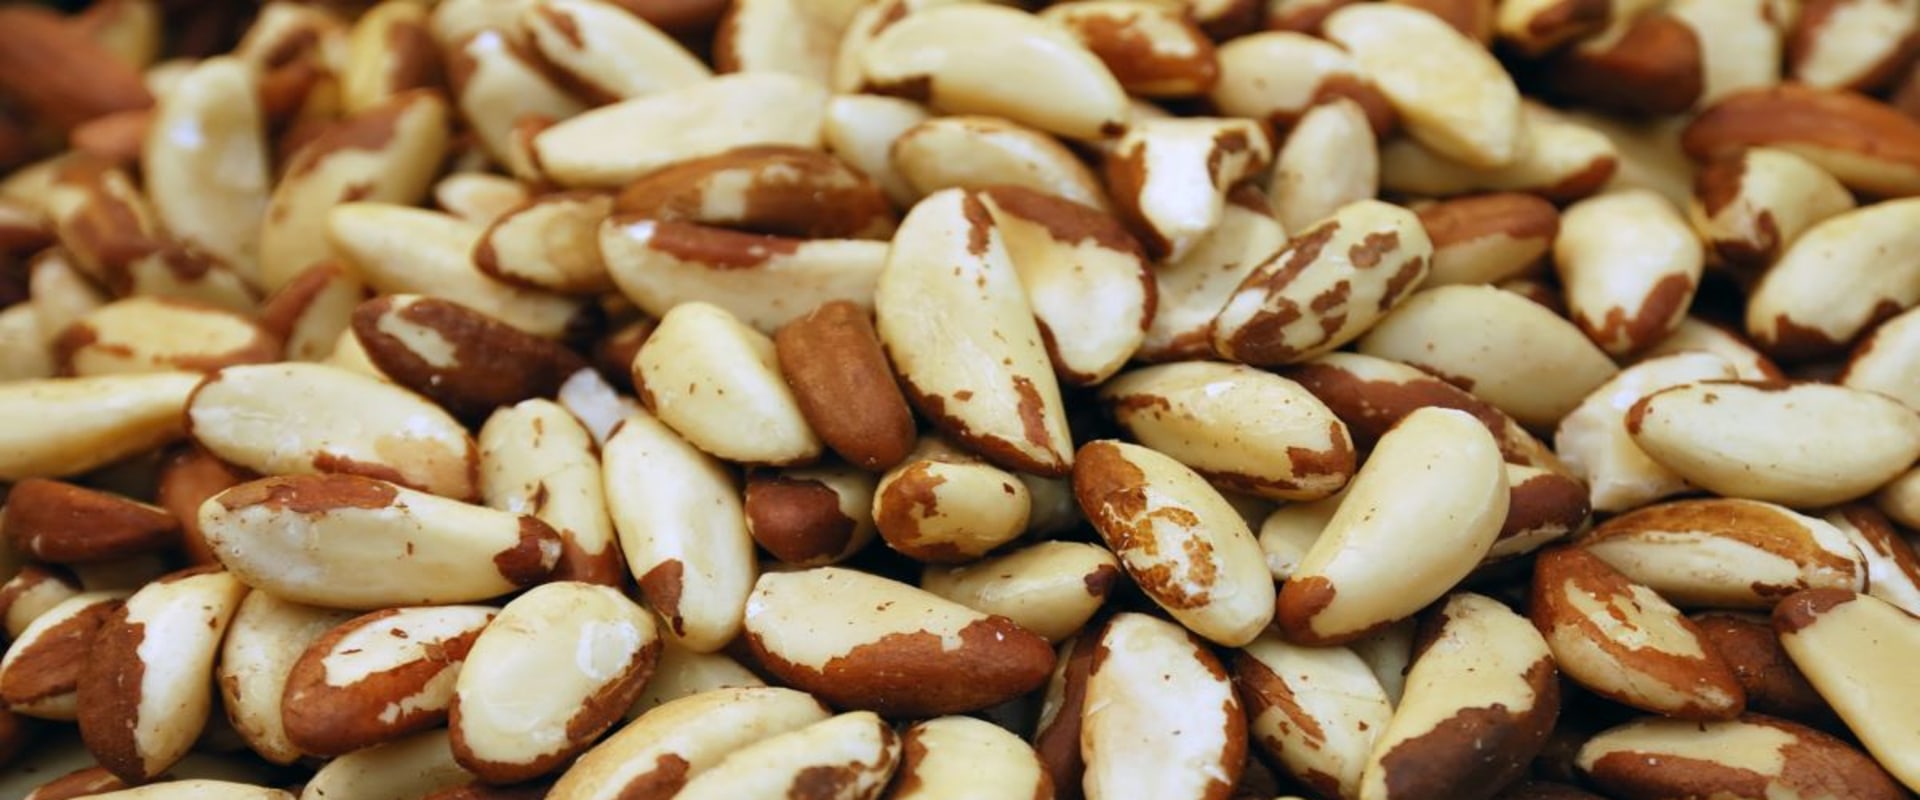 Why are there no more brazil nuts?